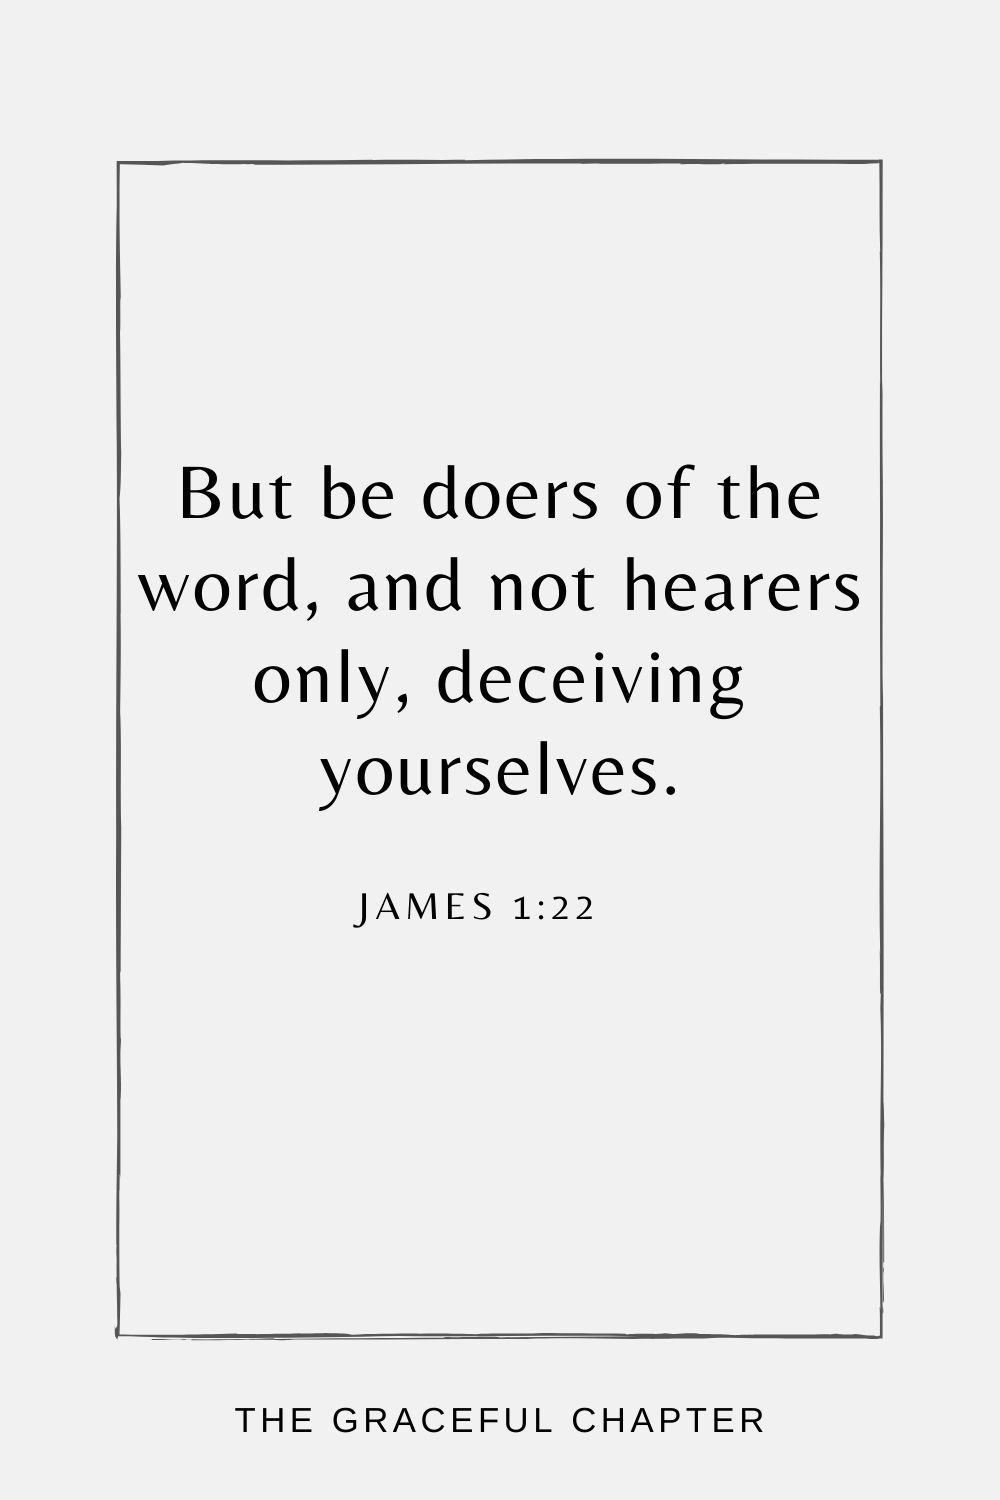 But be doers of the word, and not hearers only, deceiving yourselves. James 1:22